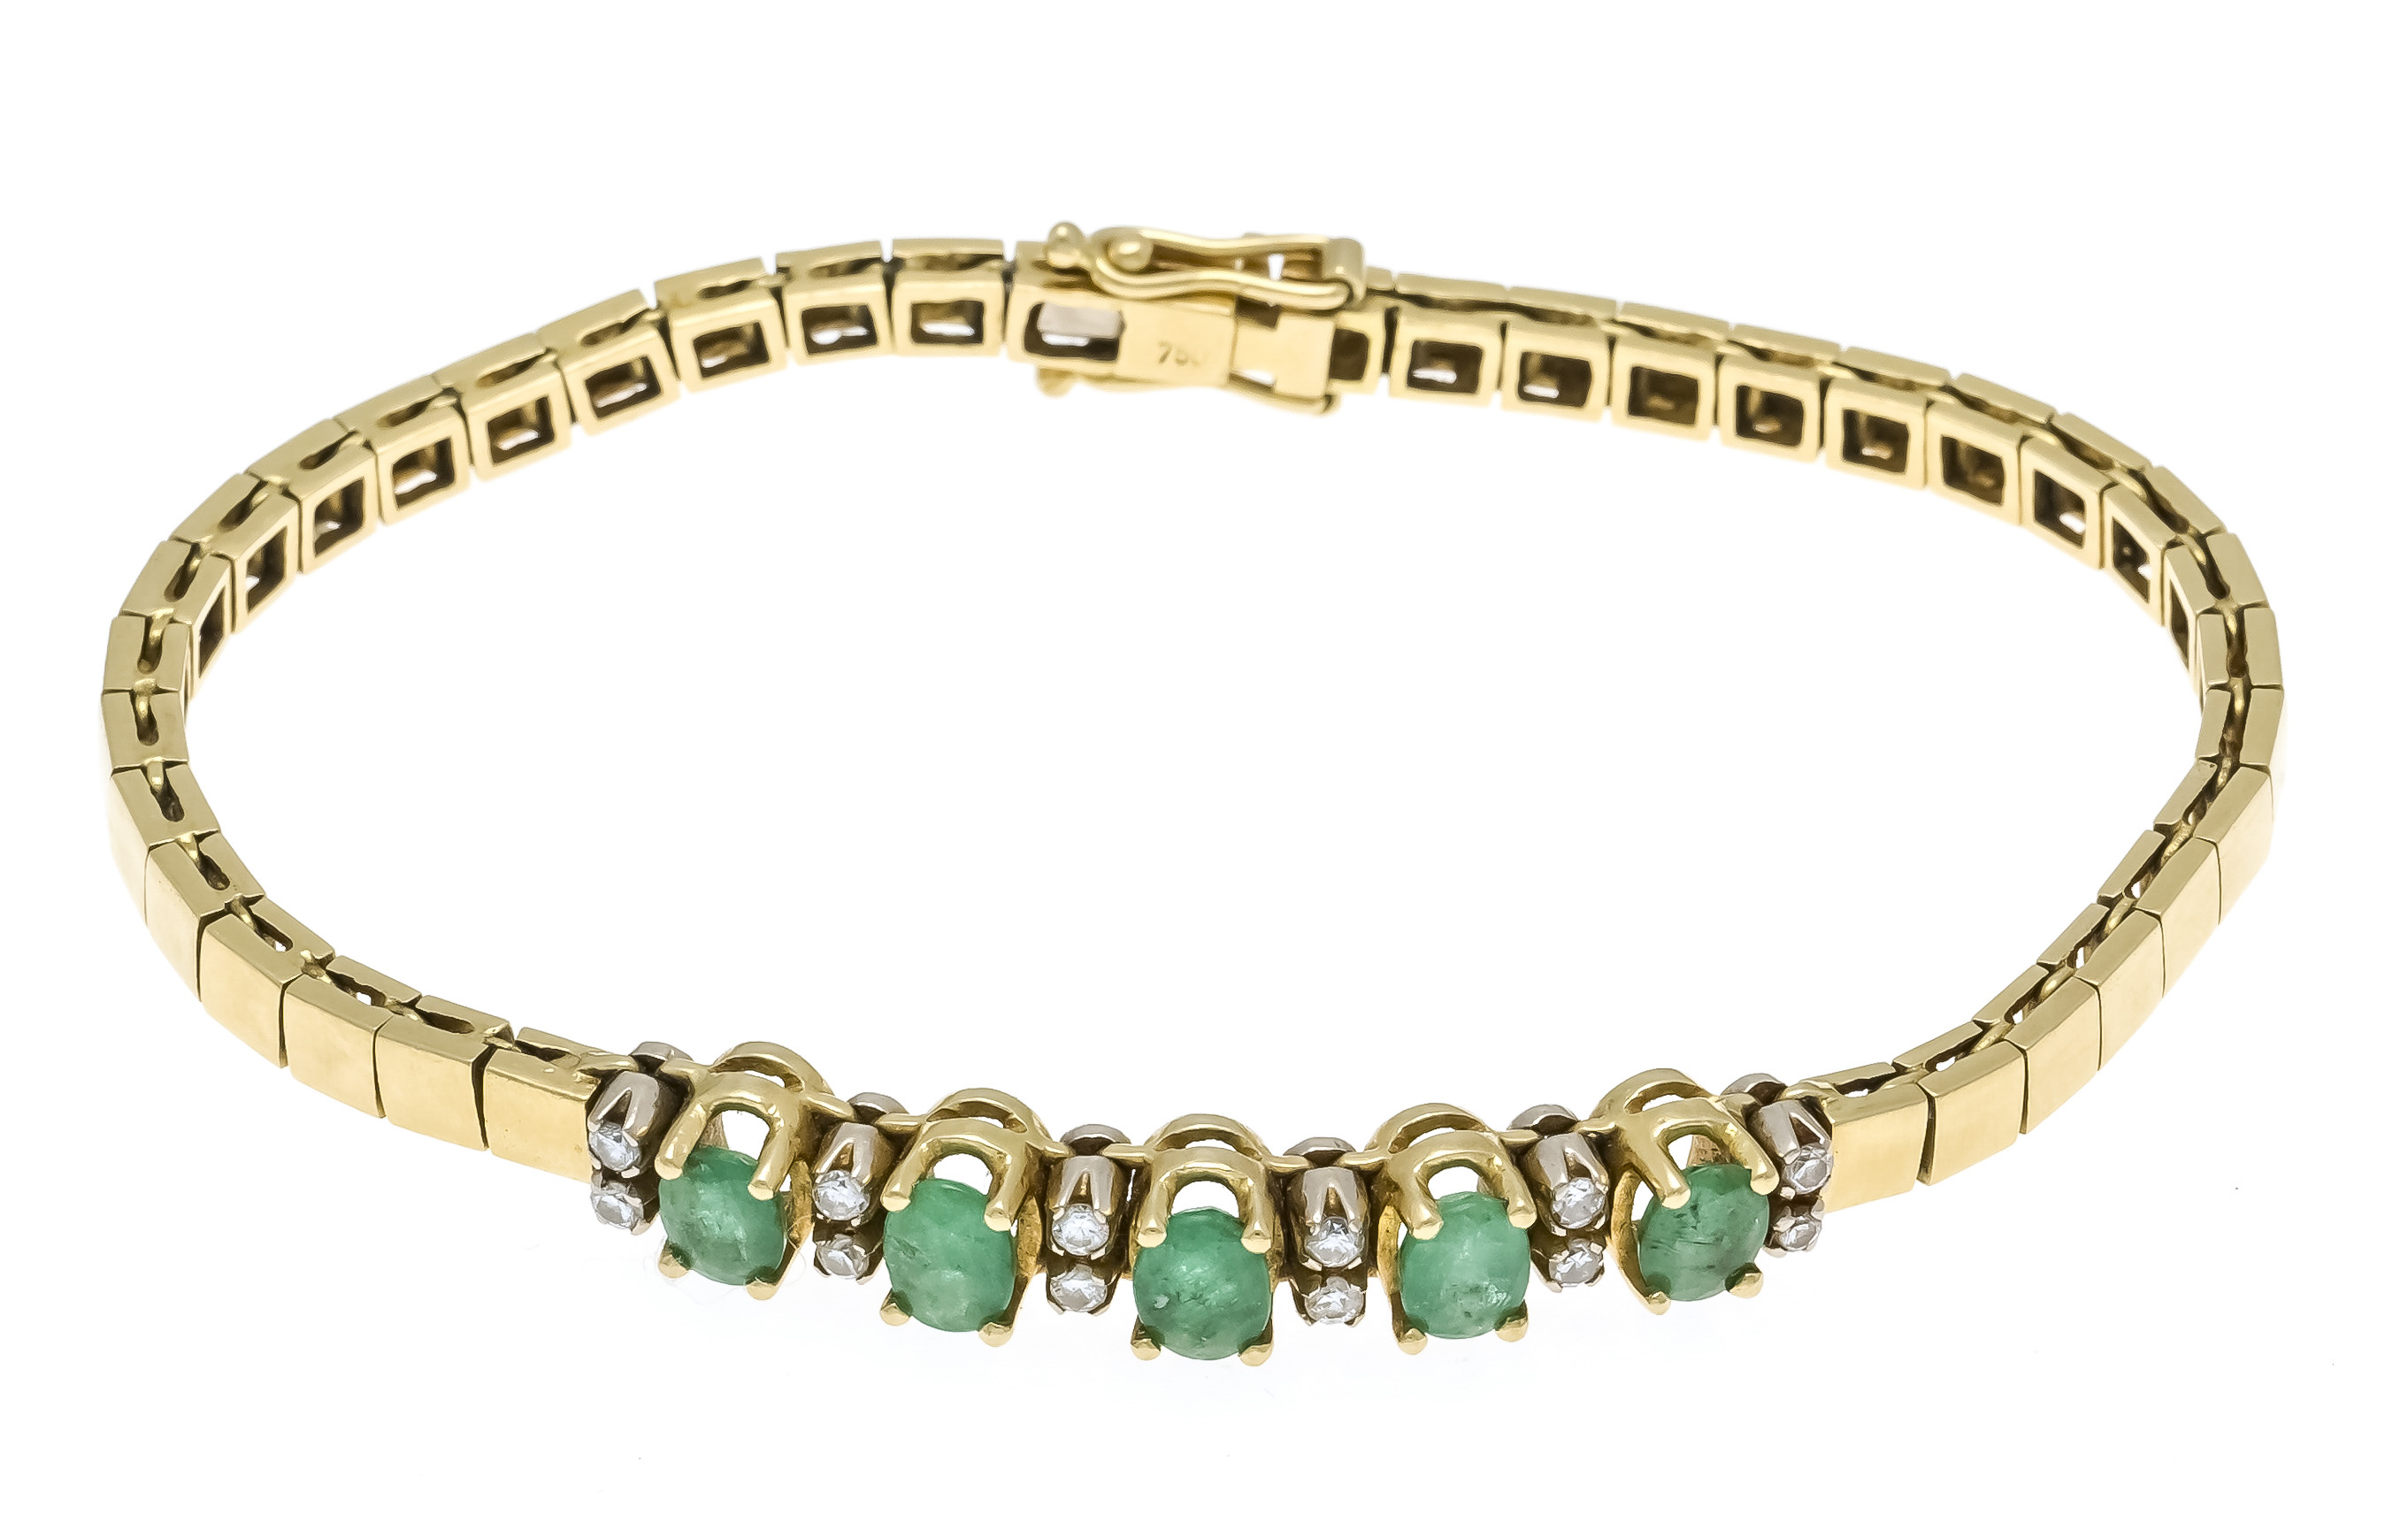 Emerald-brilliant bracelet GG/WG 750/000 with 5 oval faceted emeralds, total 1.86 ct green,